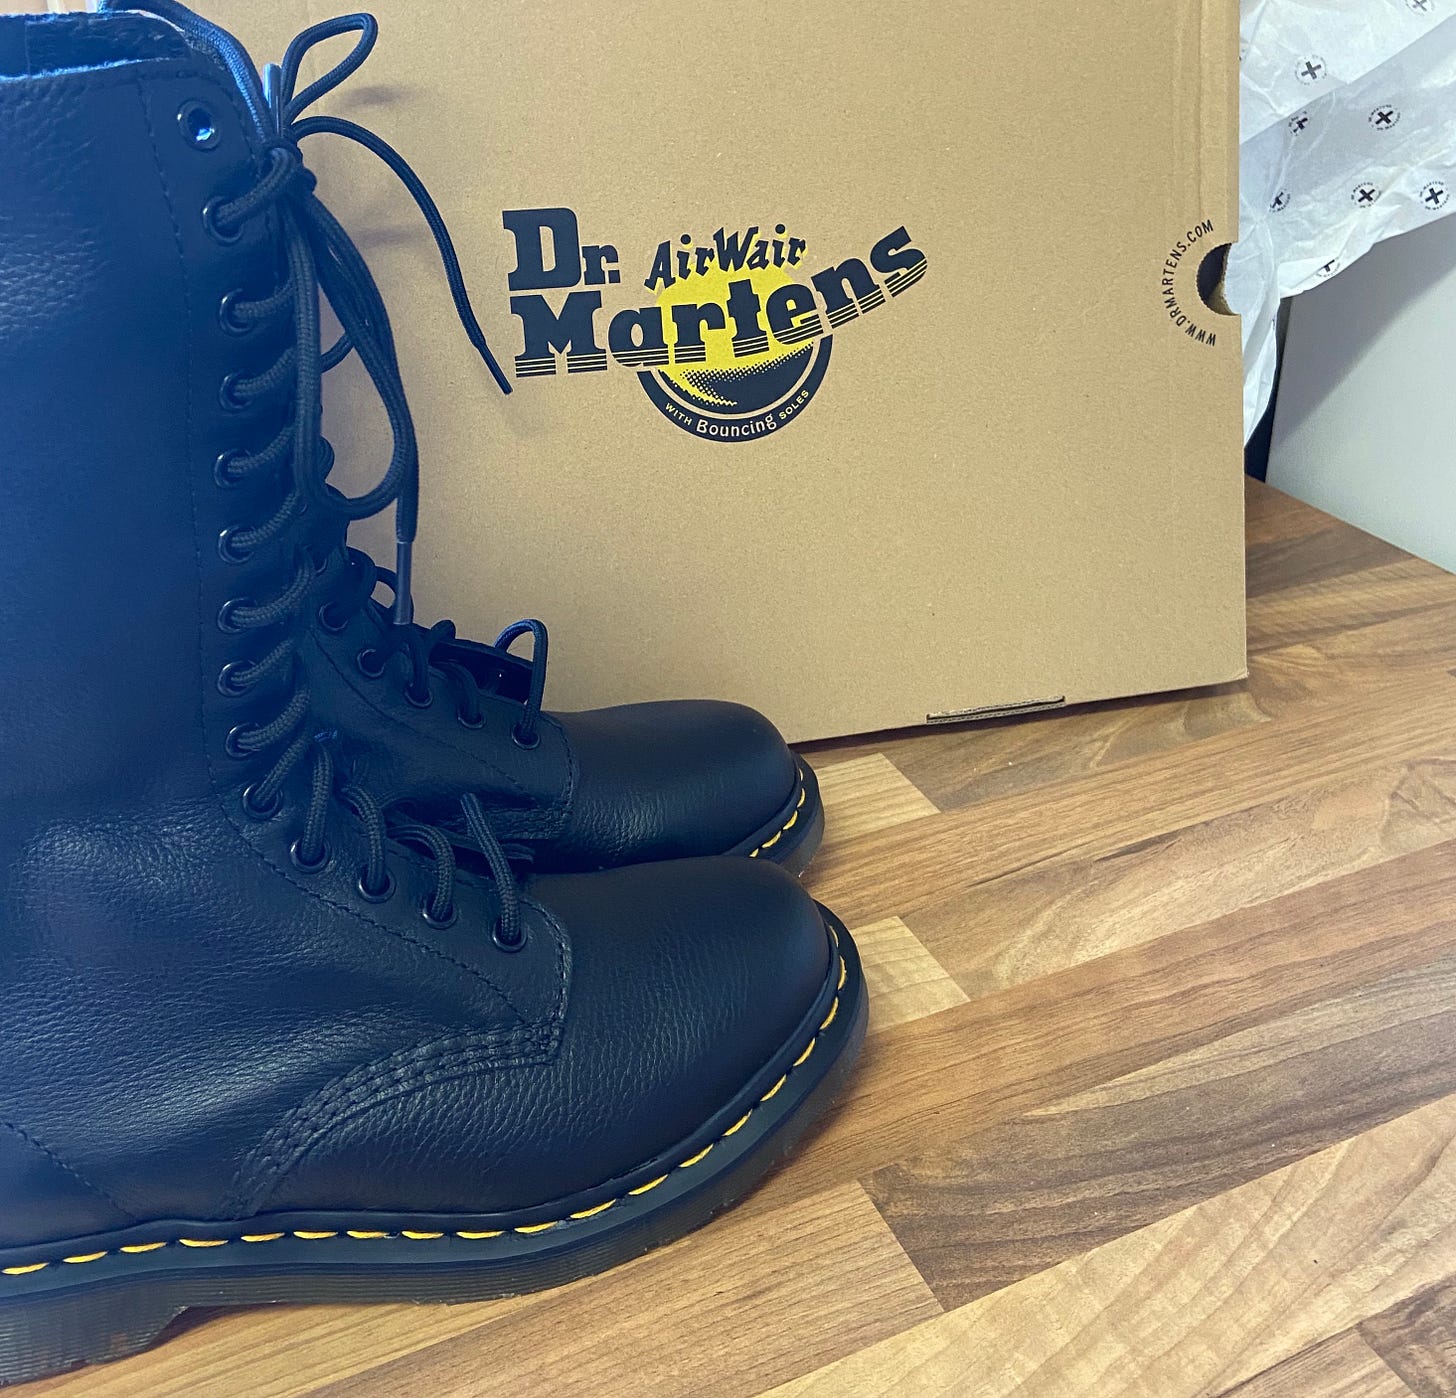 A pair of Dr. Martens boots